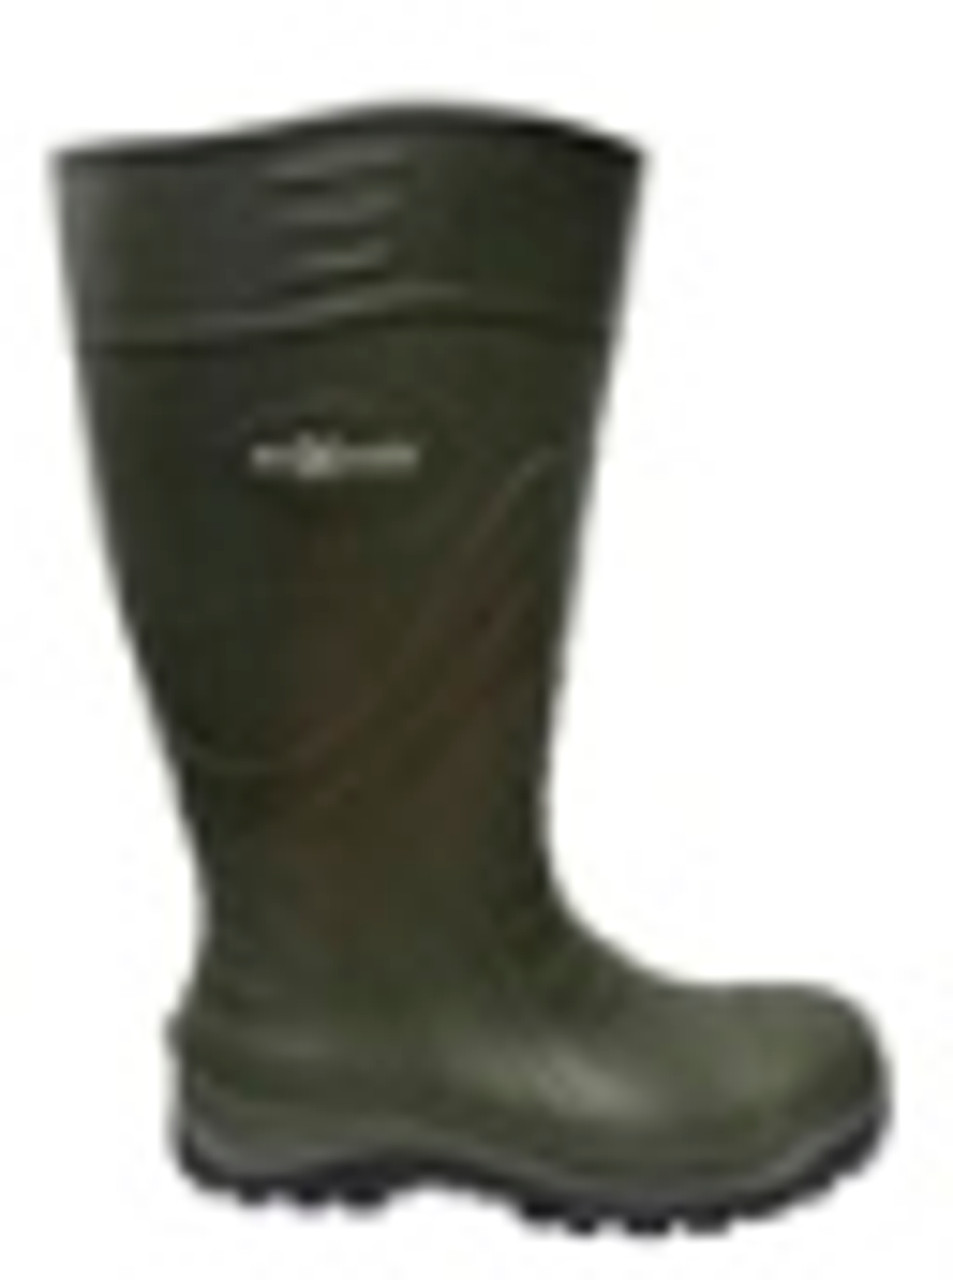 Patrol Green Pu Boot W/ Safety Toe, Size 5